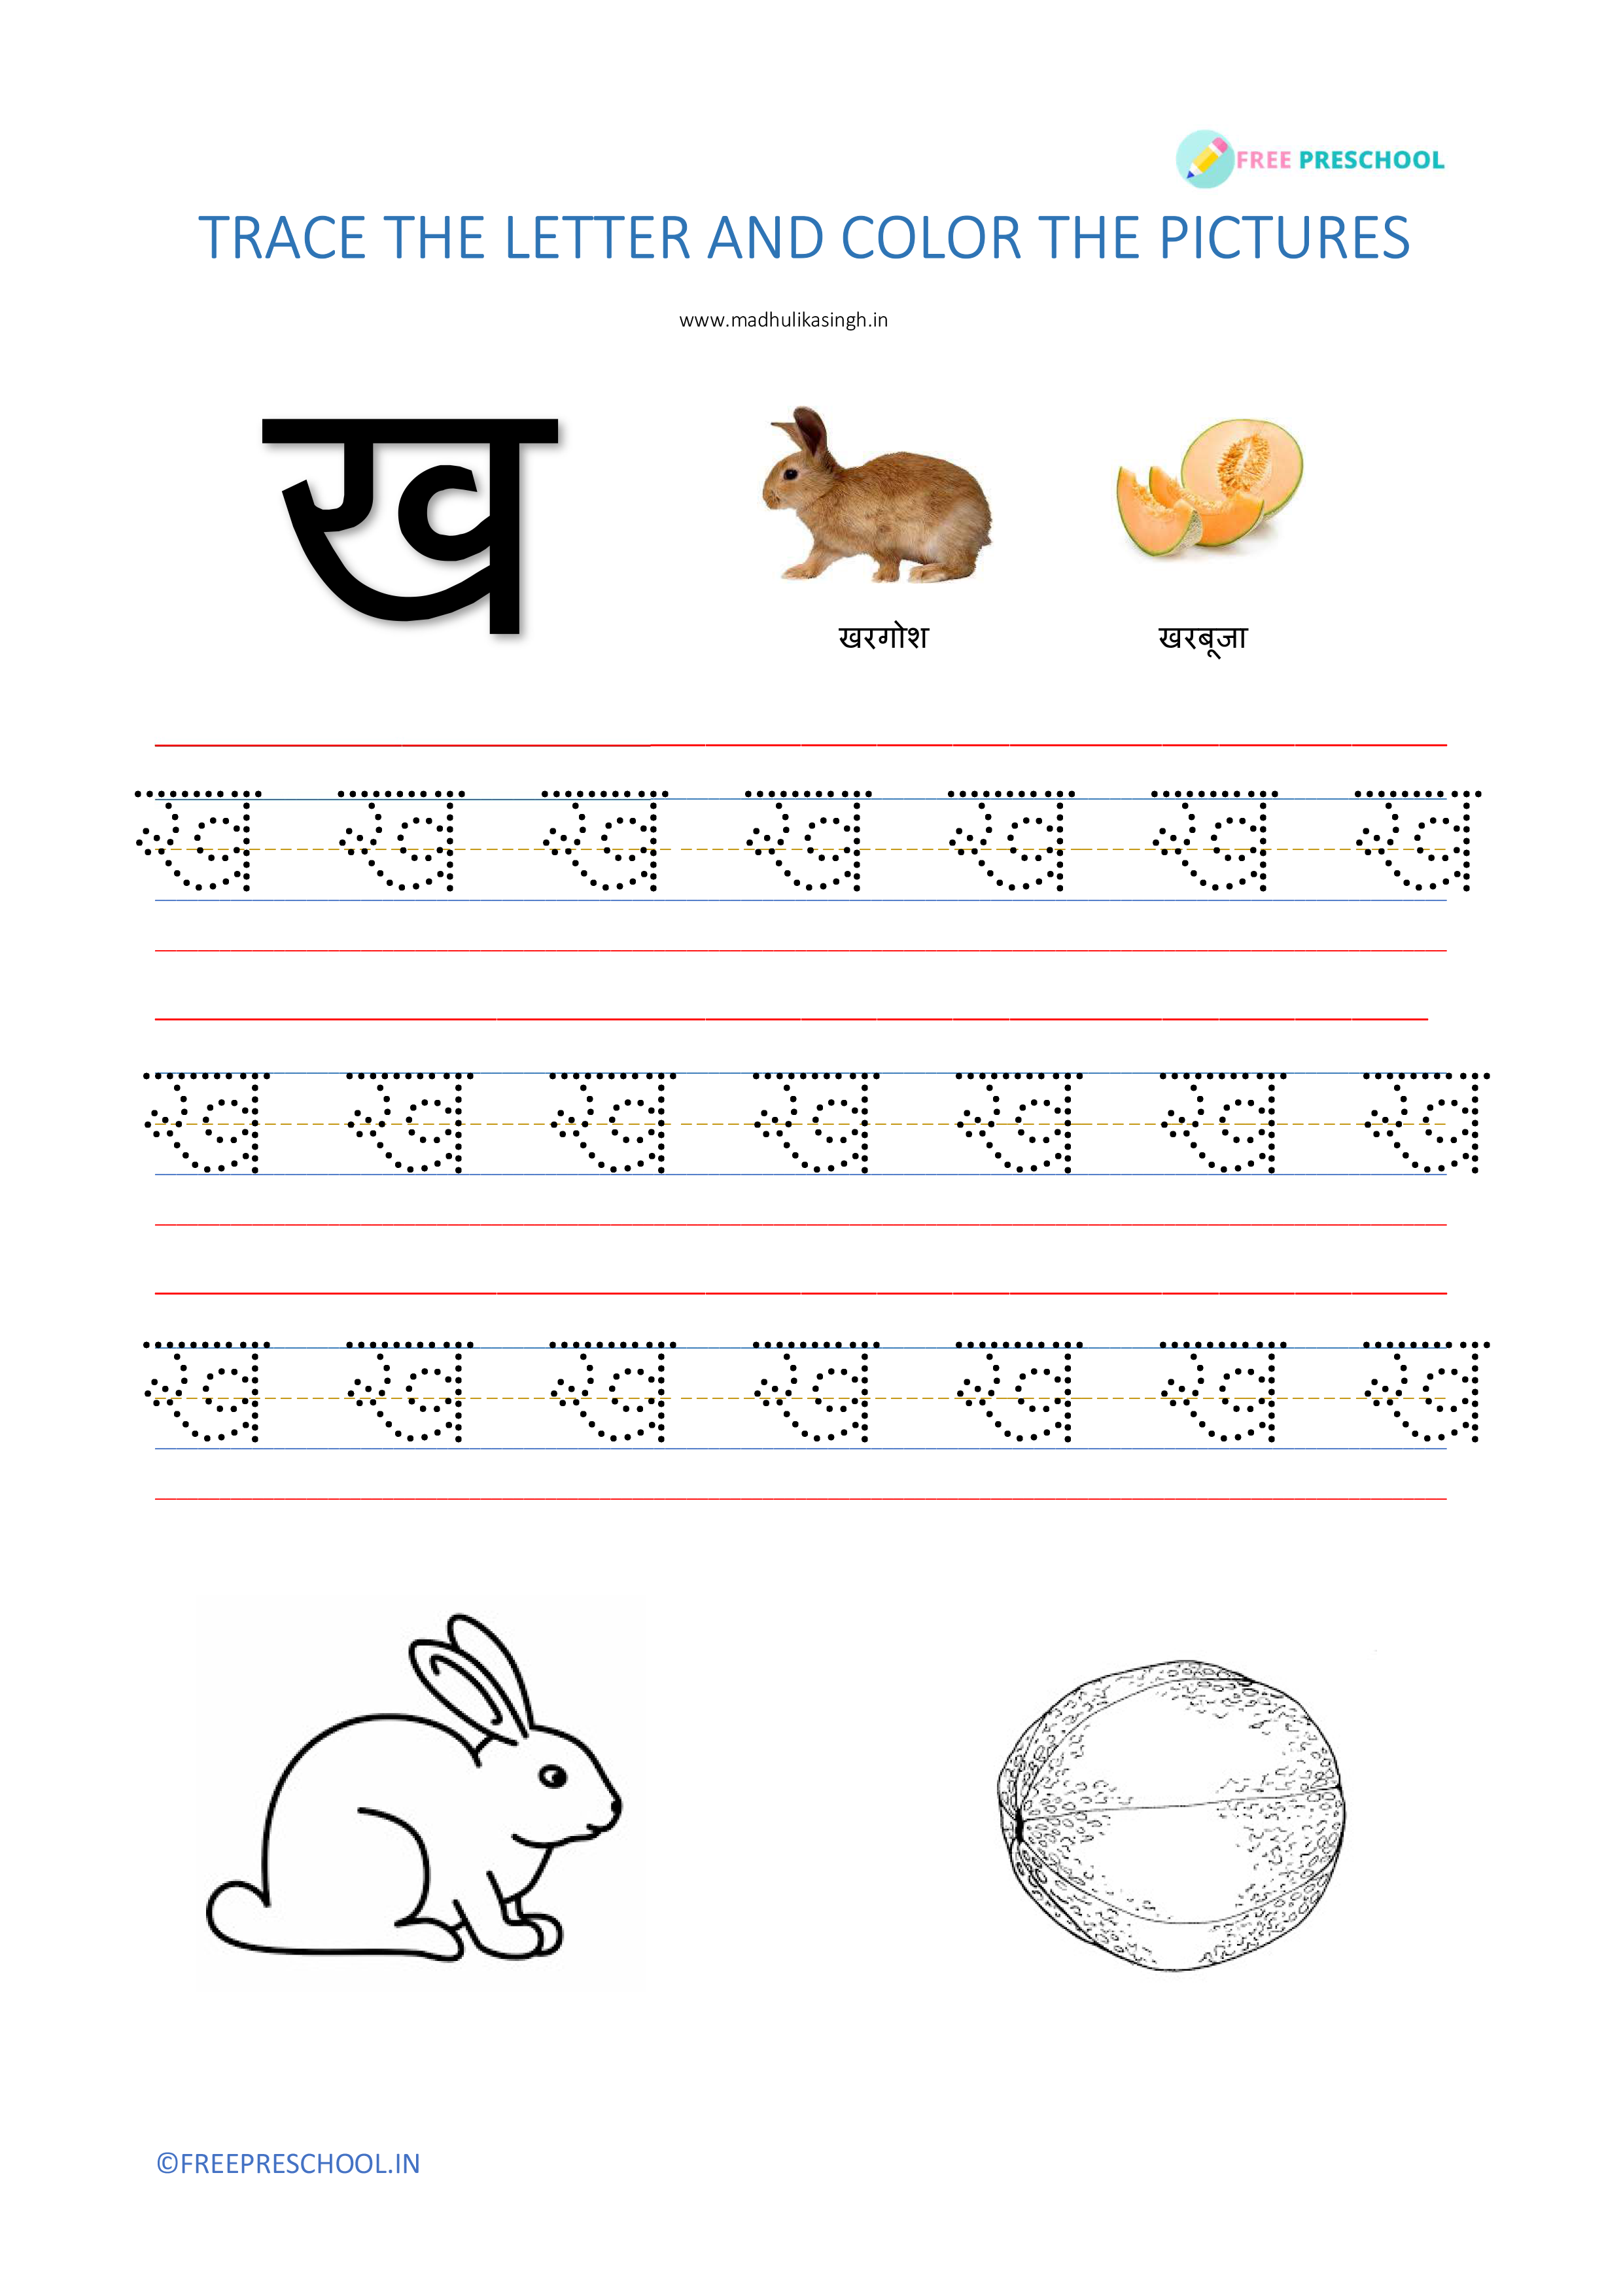 hindi-alphabet-tracing-worksheets-printable-pdf-to-56-pages-free-preschool